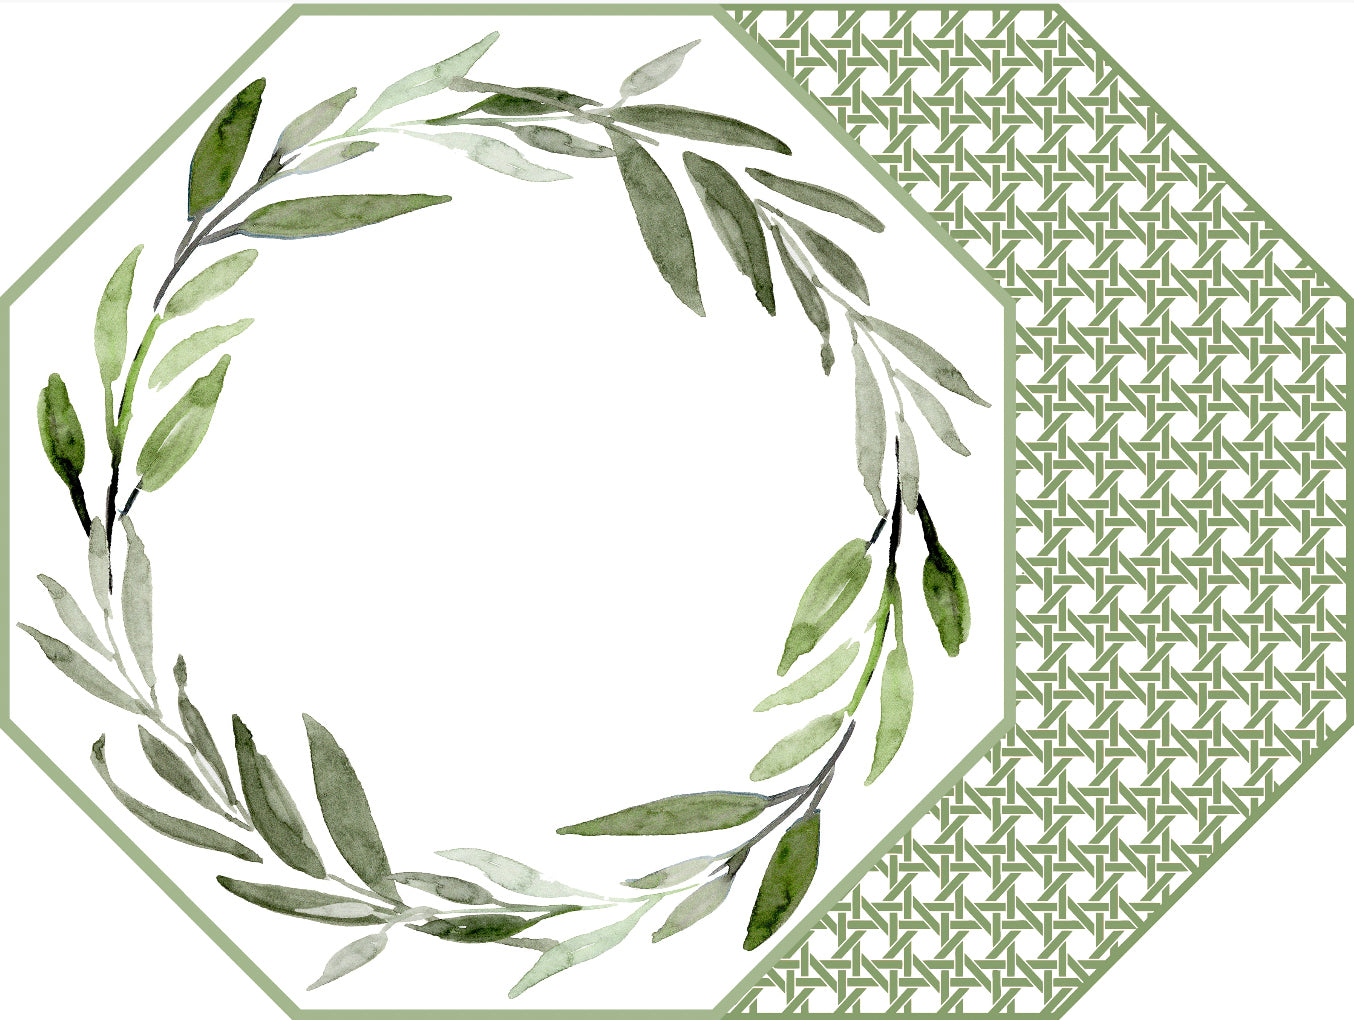 OCTAGONAL TWO SIDED LEAVES WREATH PLACEMAT WITH CANE ~ SAXON GREEN